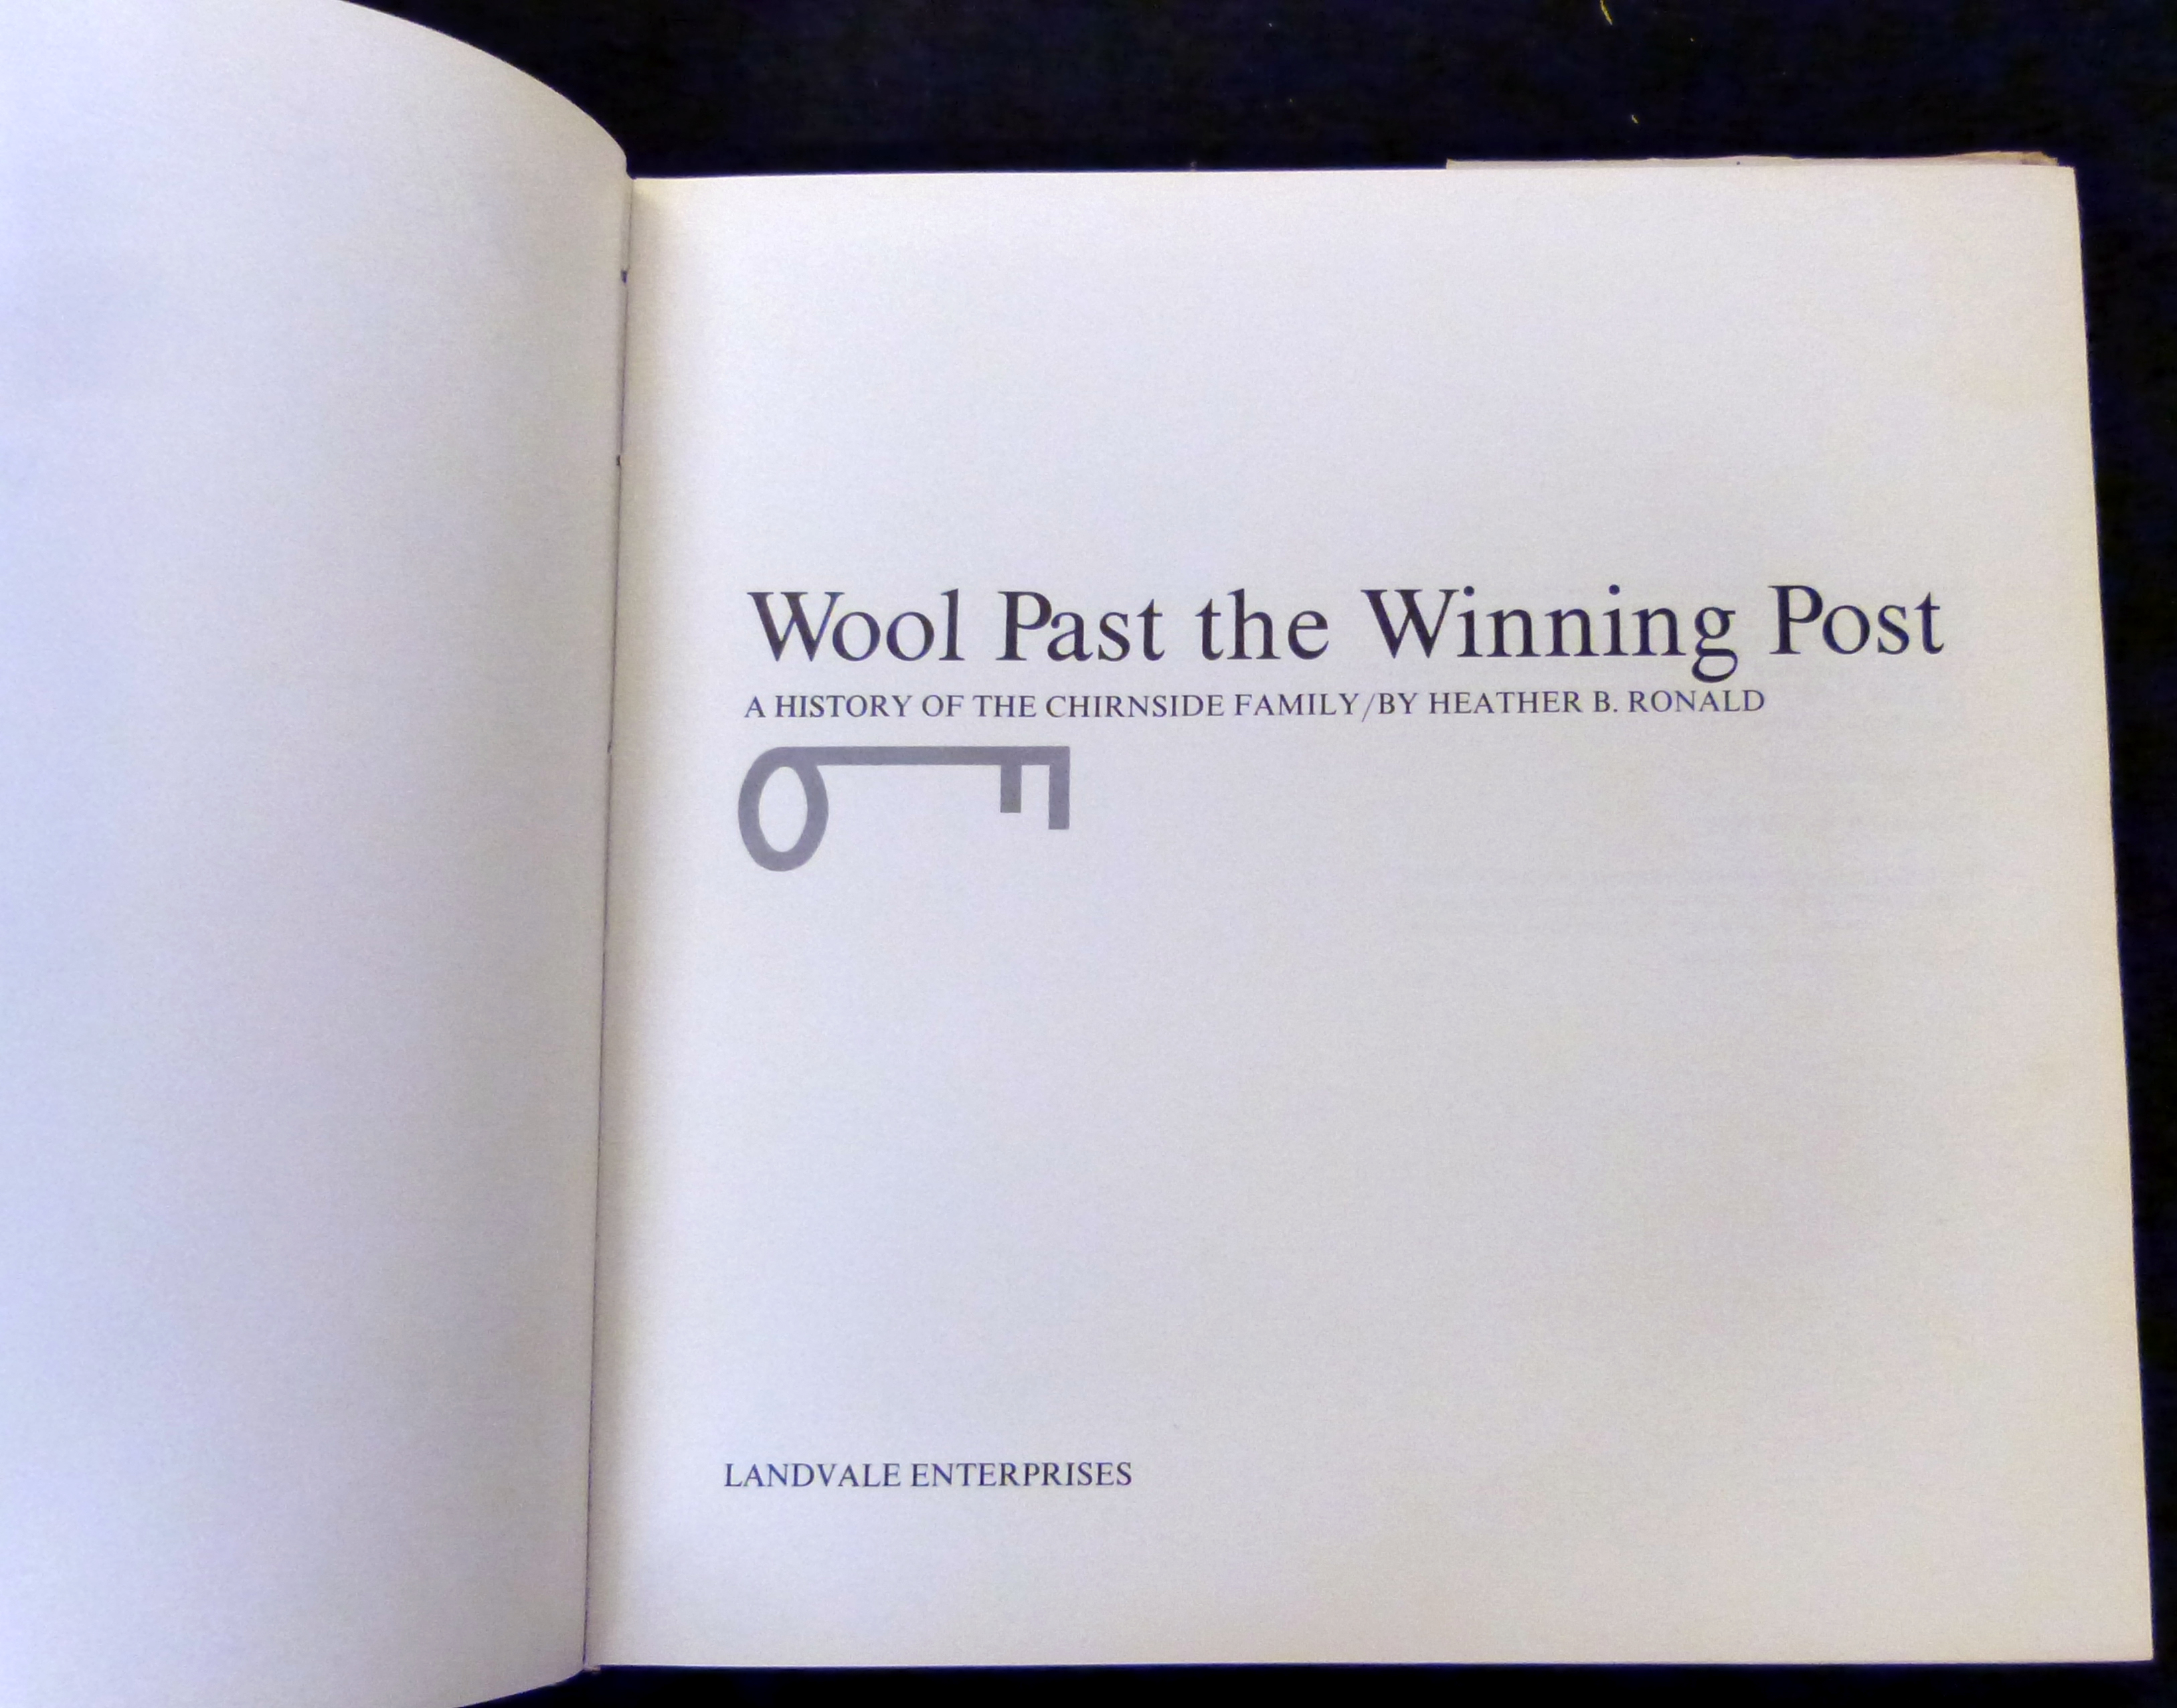 HEATHER B RONALD: WOOL PAST WINNING POST, A HISTORY OF THE CHIRNSIDE FAMILY, South Yarra, - Image 2 of 4